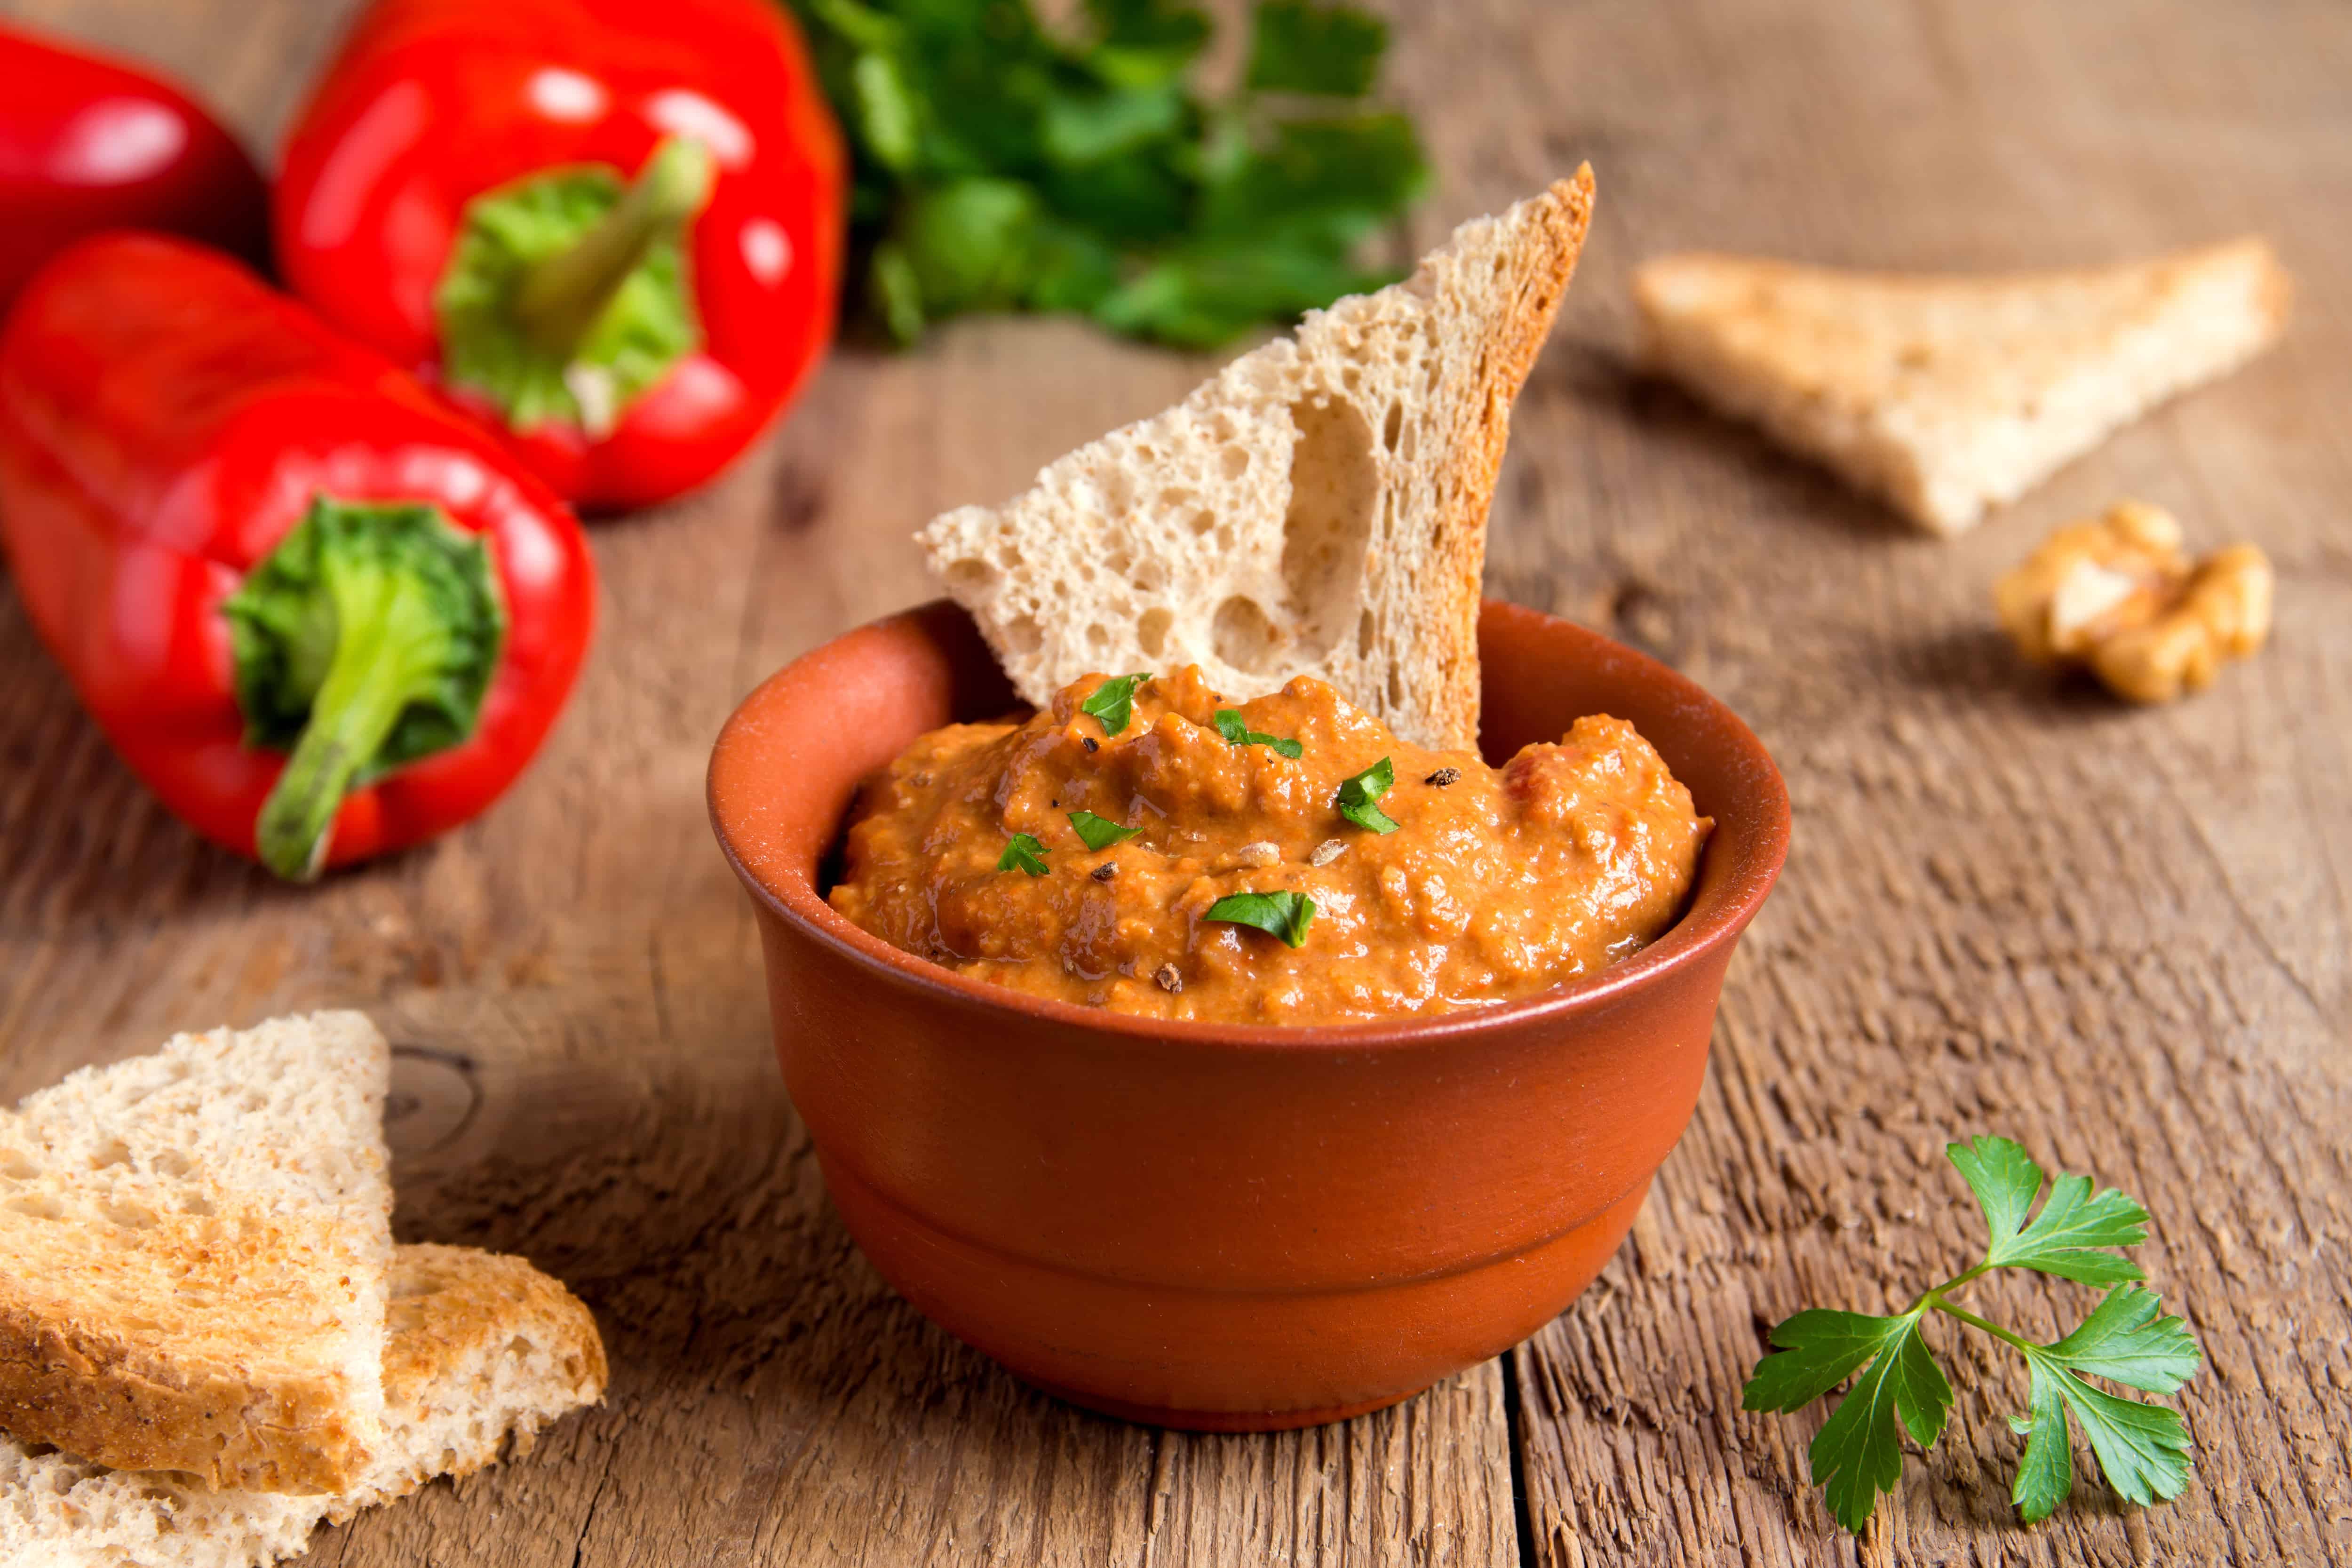 red pepper hummus - Oil-Free Hummus Recipe Roundup: All the Flavor Without the Added Fat